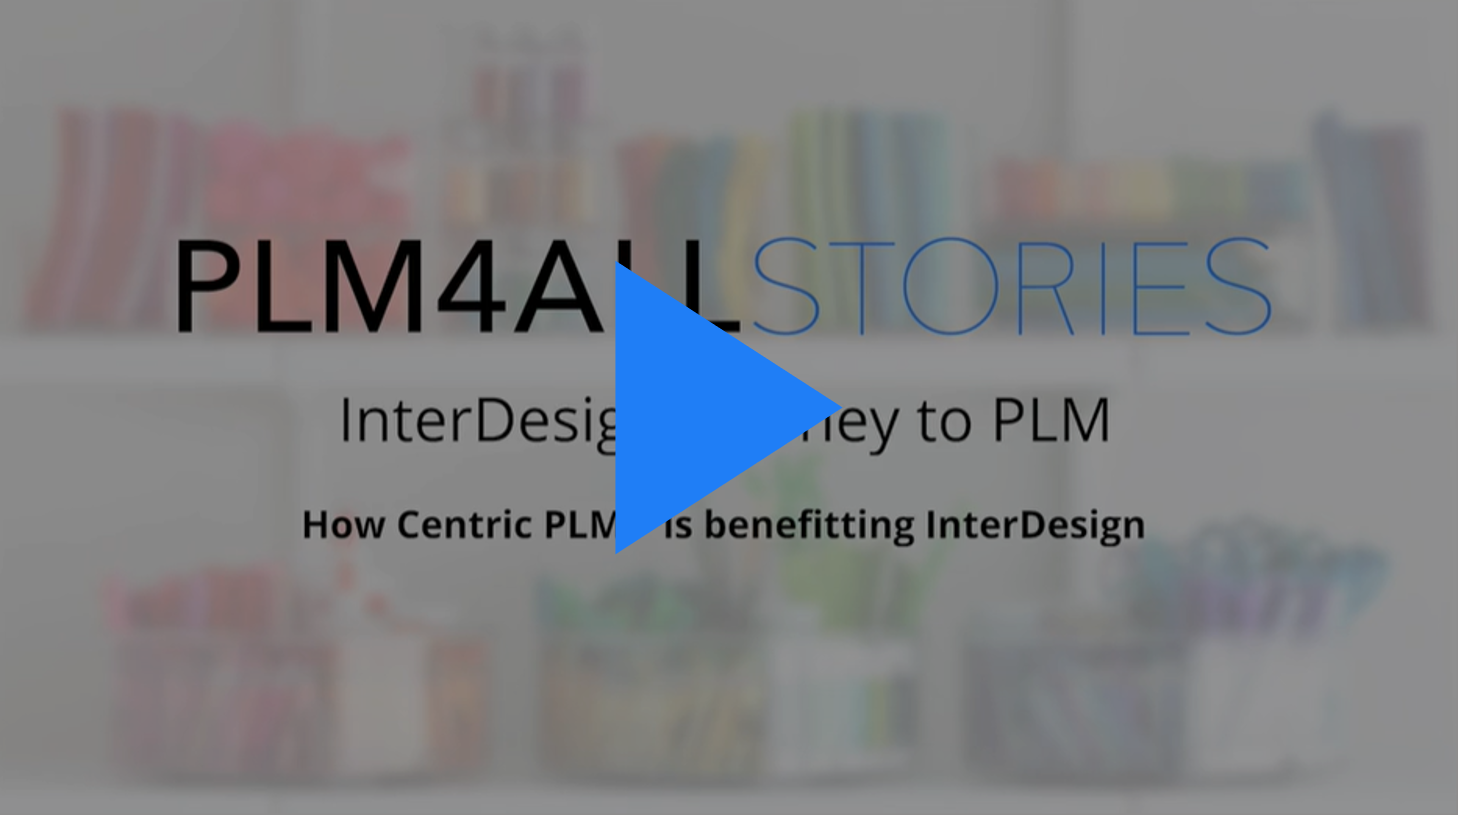 Click here to watch video 4 with InterDesign